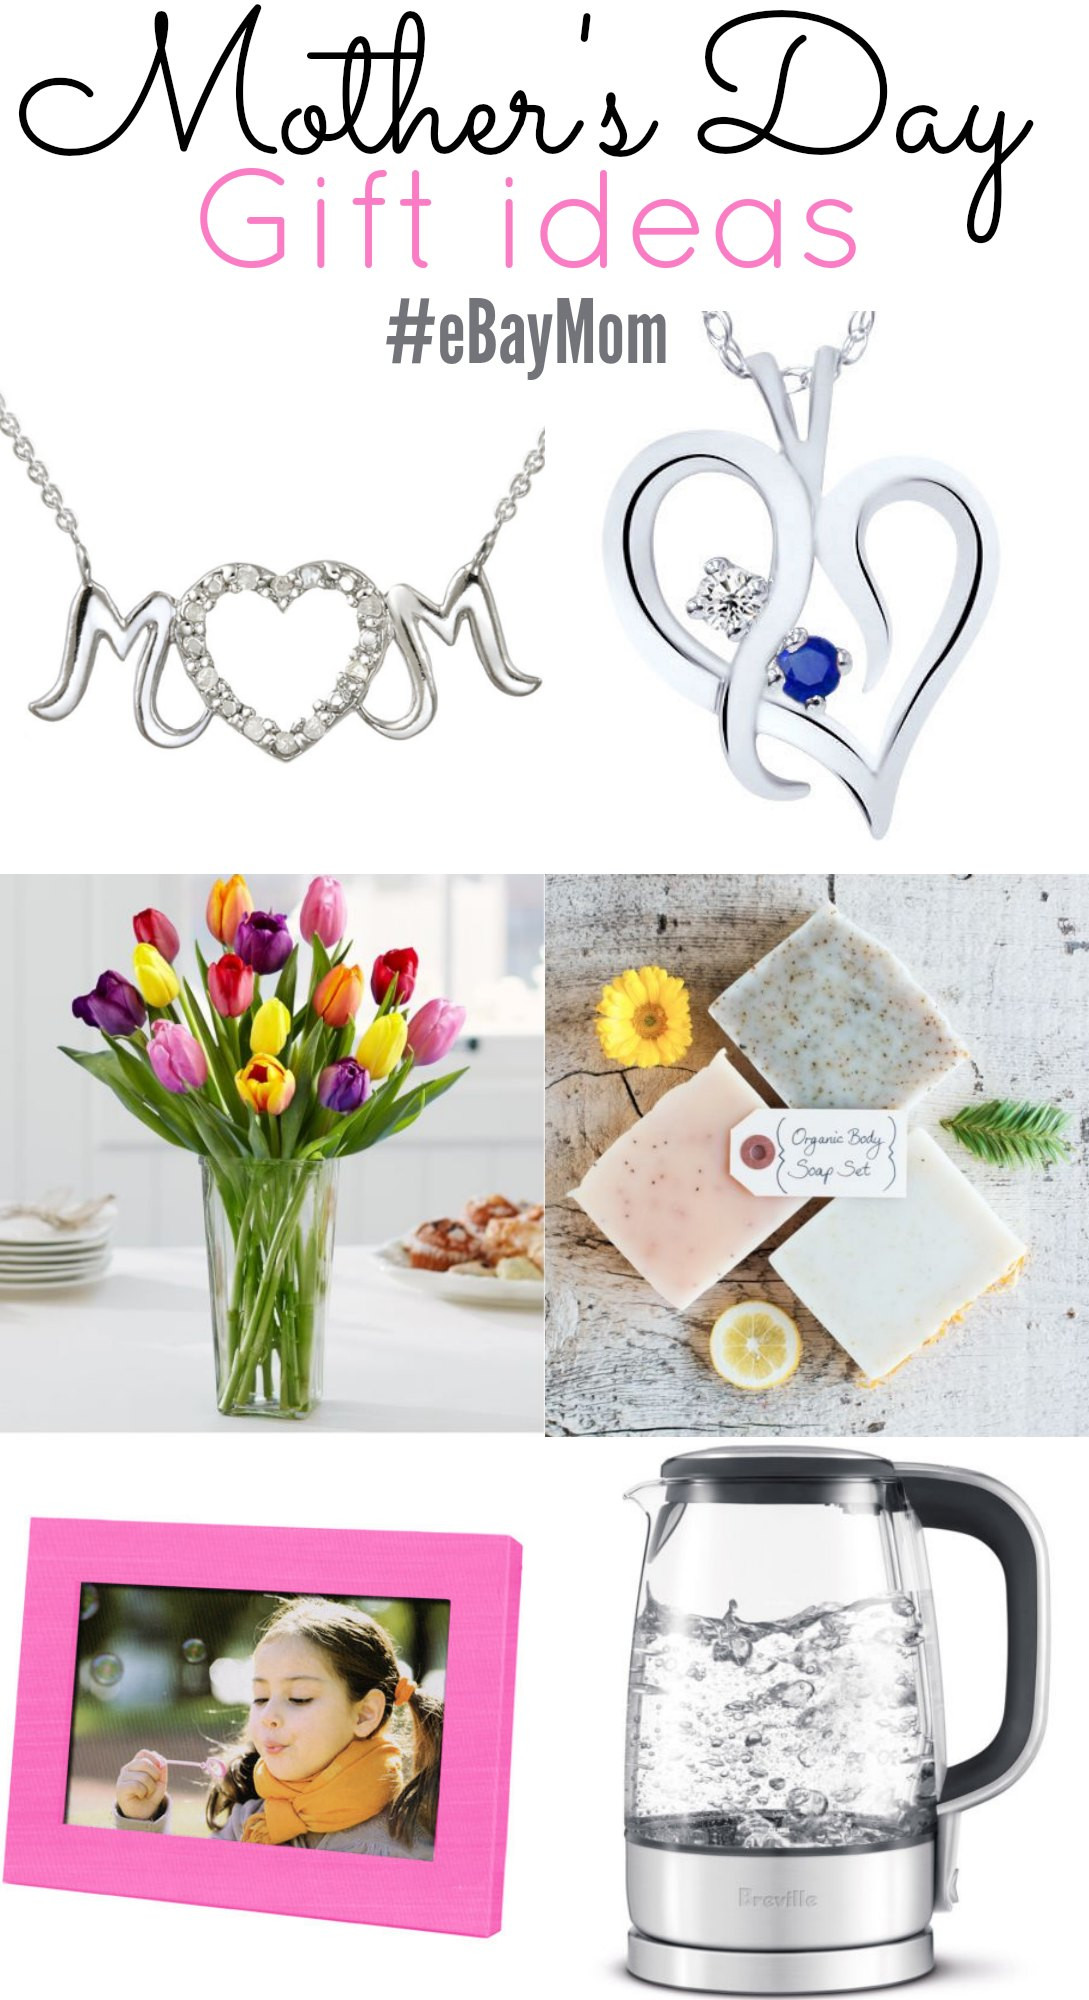 Gift Ideas Mother
 Mother’s Day Gift Ideas & Sweepstakes eBayMom ad